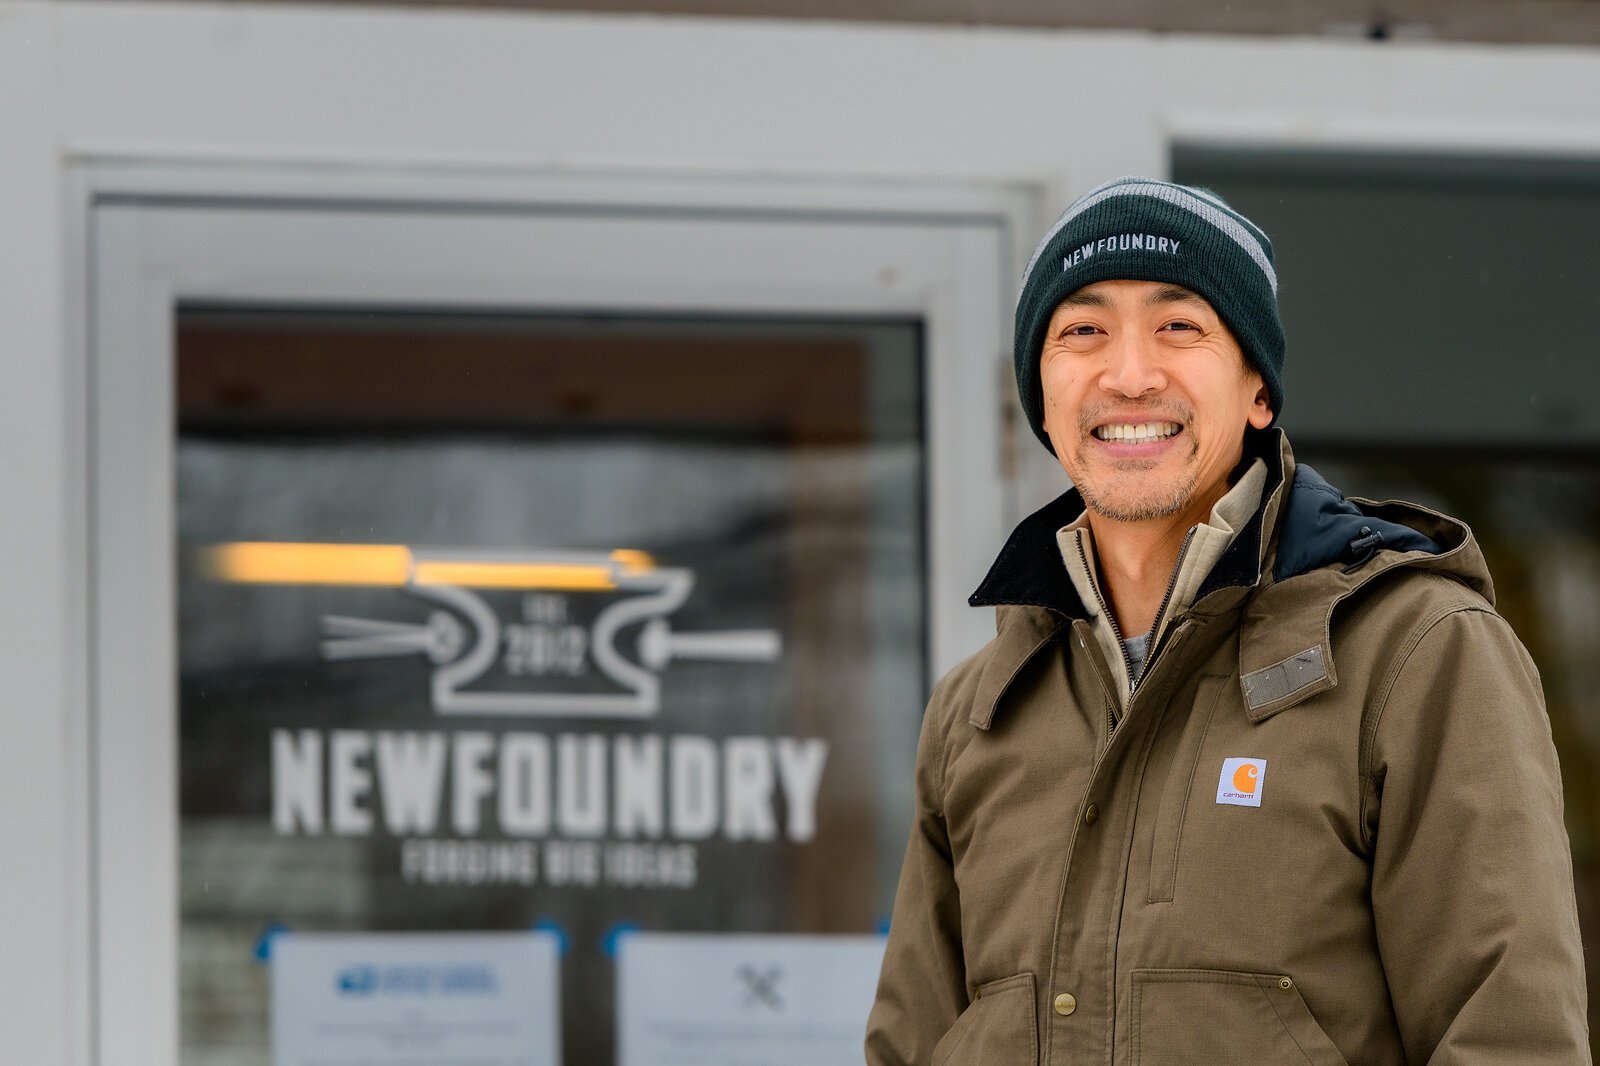 New Foundry CEO Rich Chang.